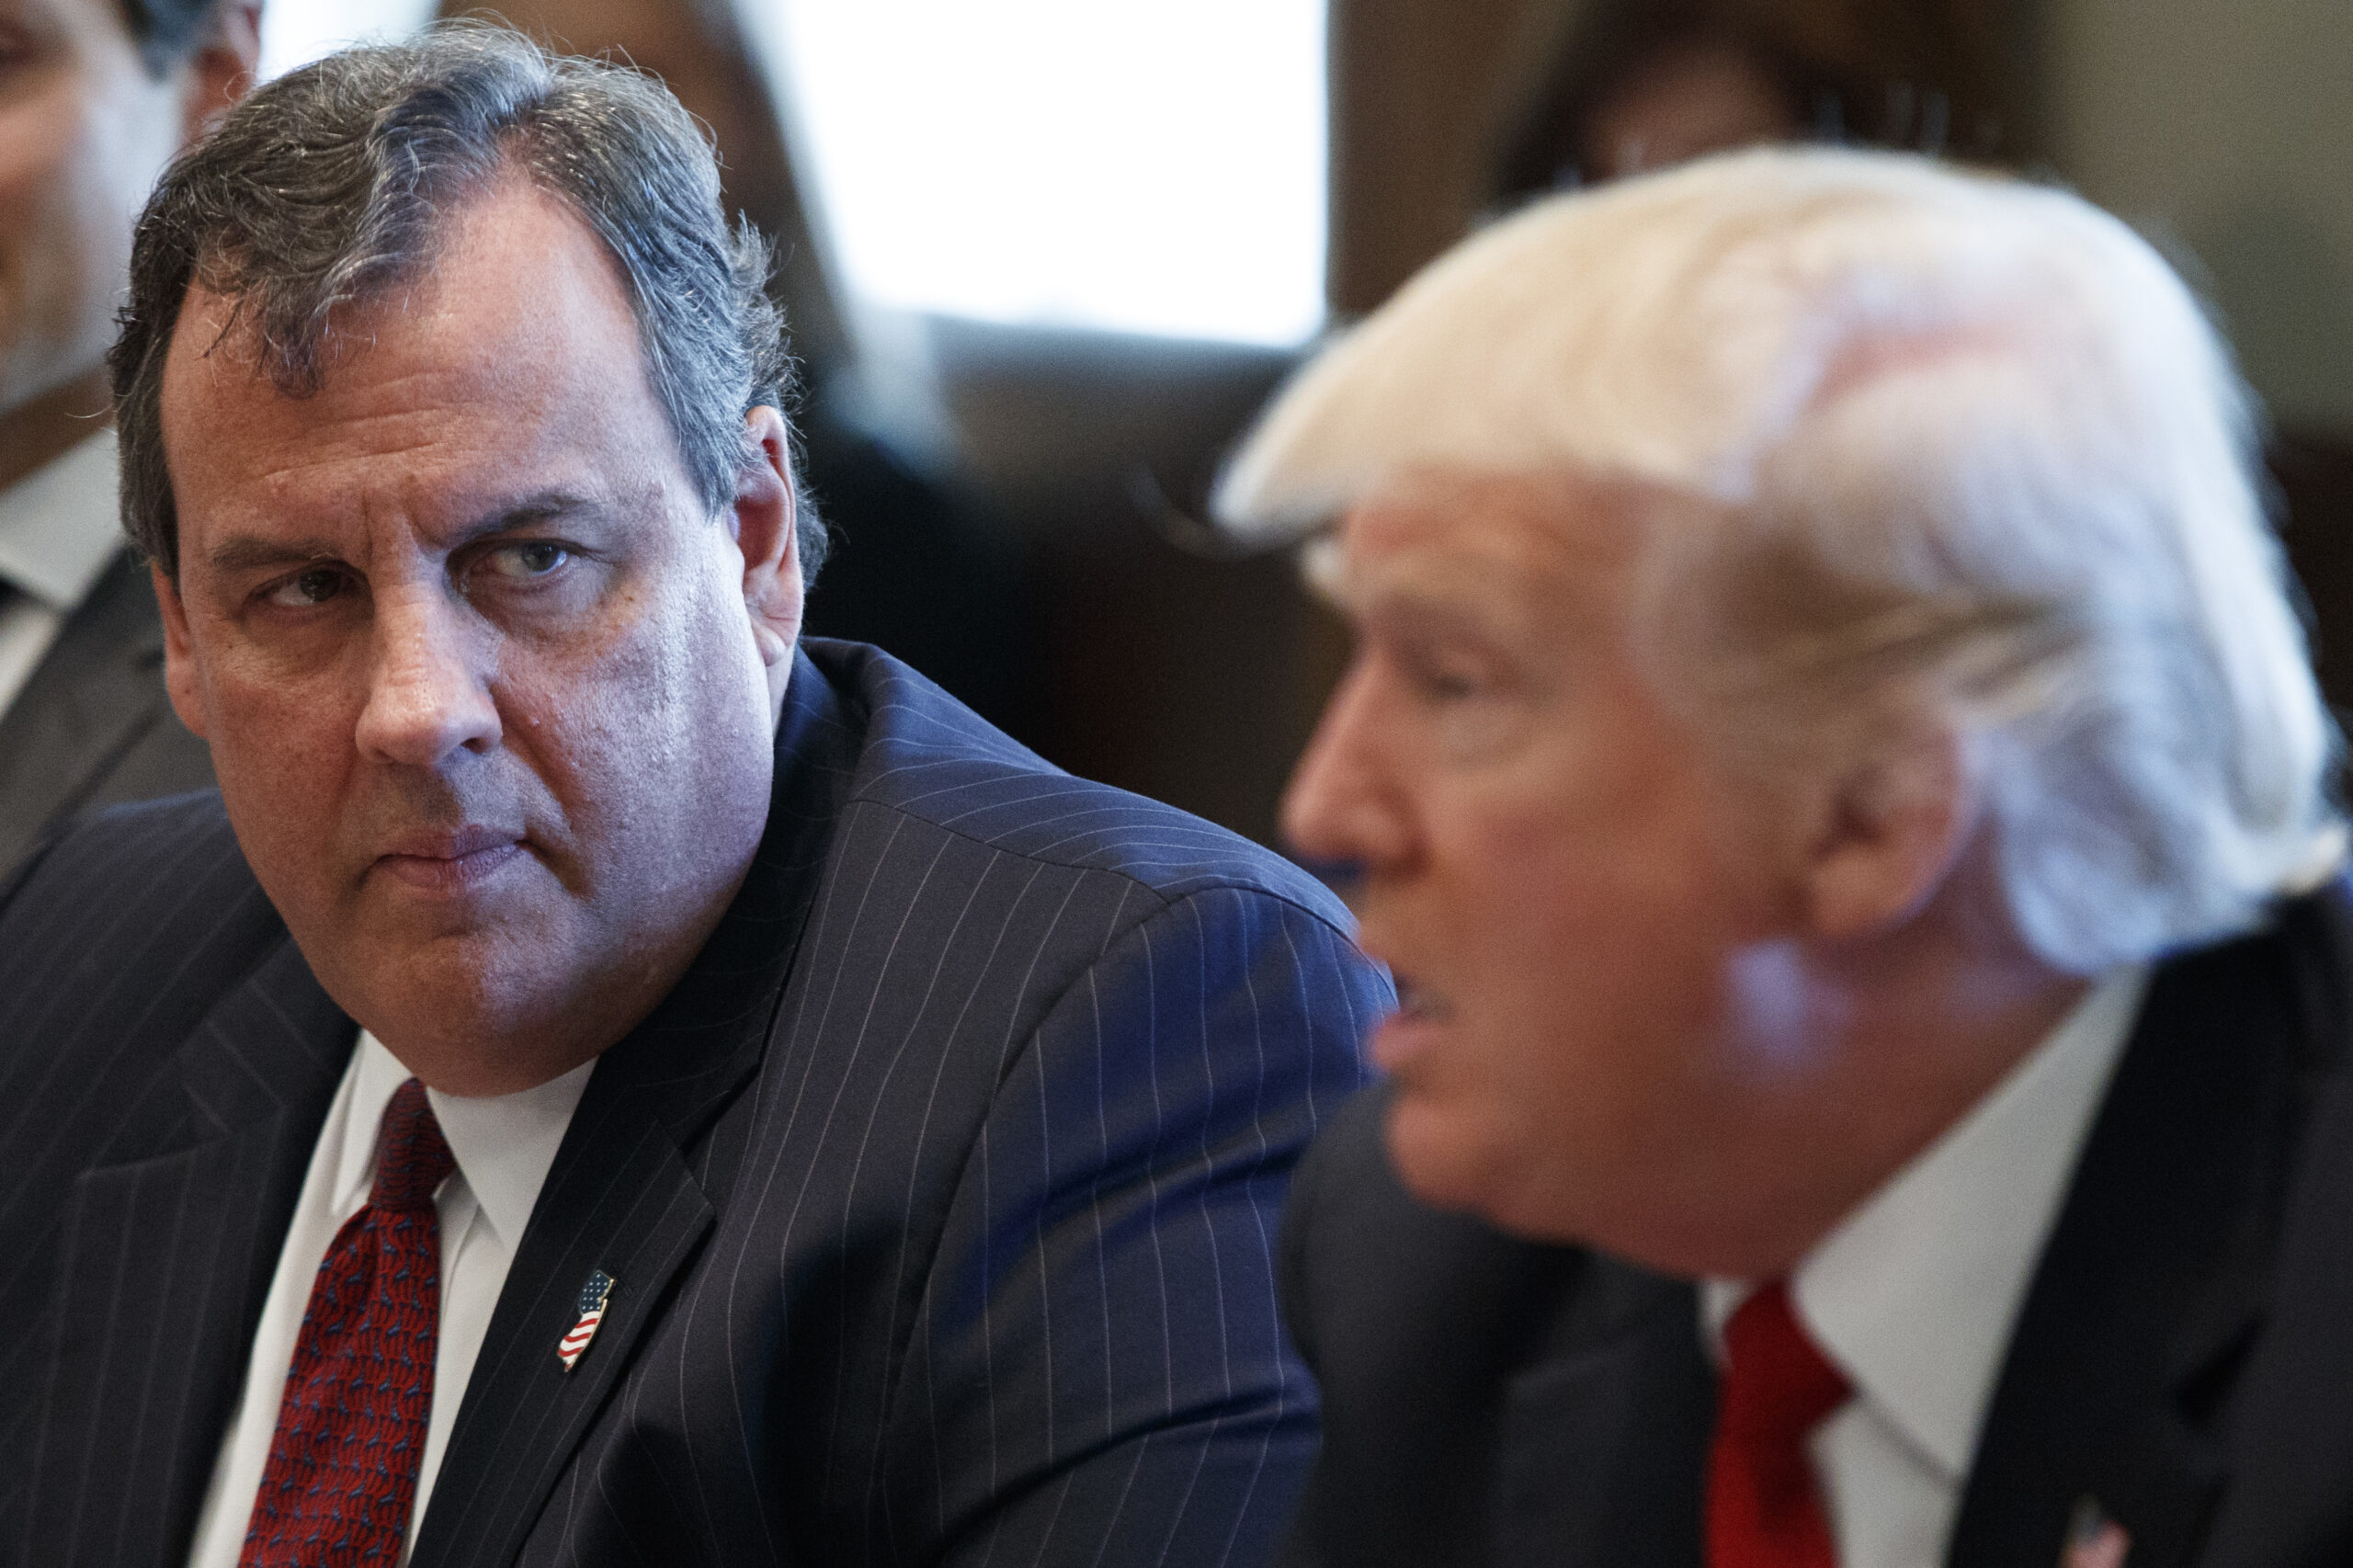 ‘Say It To My Face’: Chris Christie Challenges Trump After Ex-President Cracks Weight Joke About Him